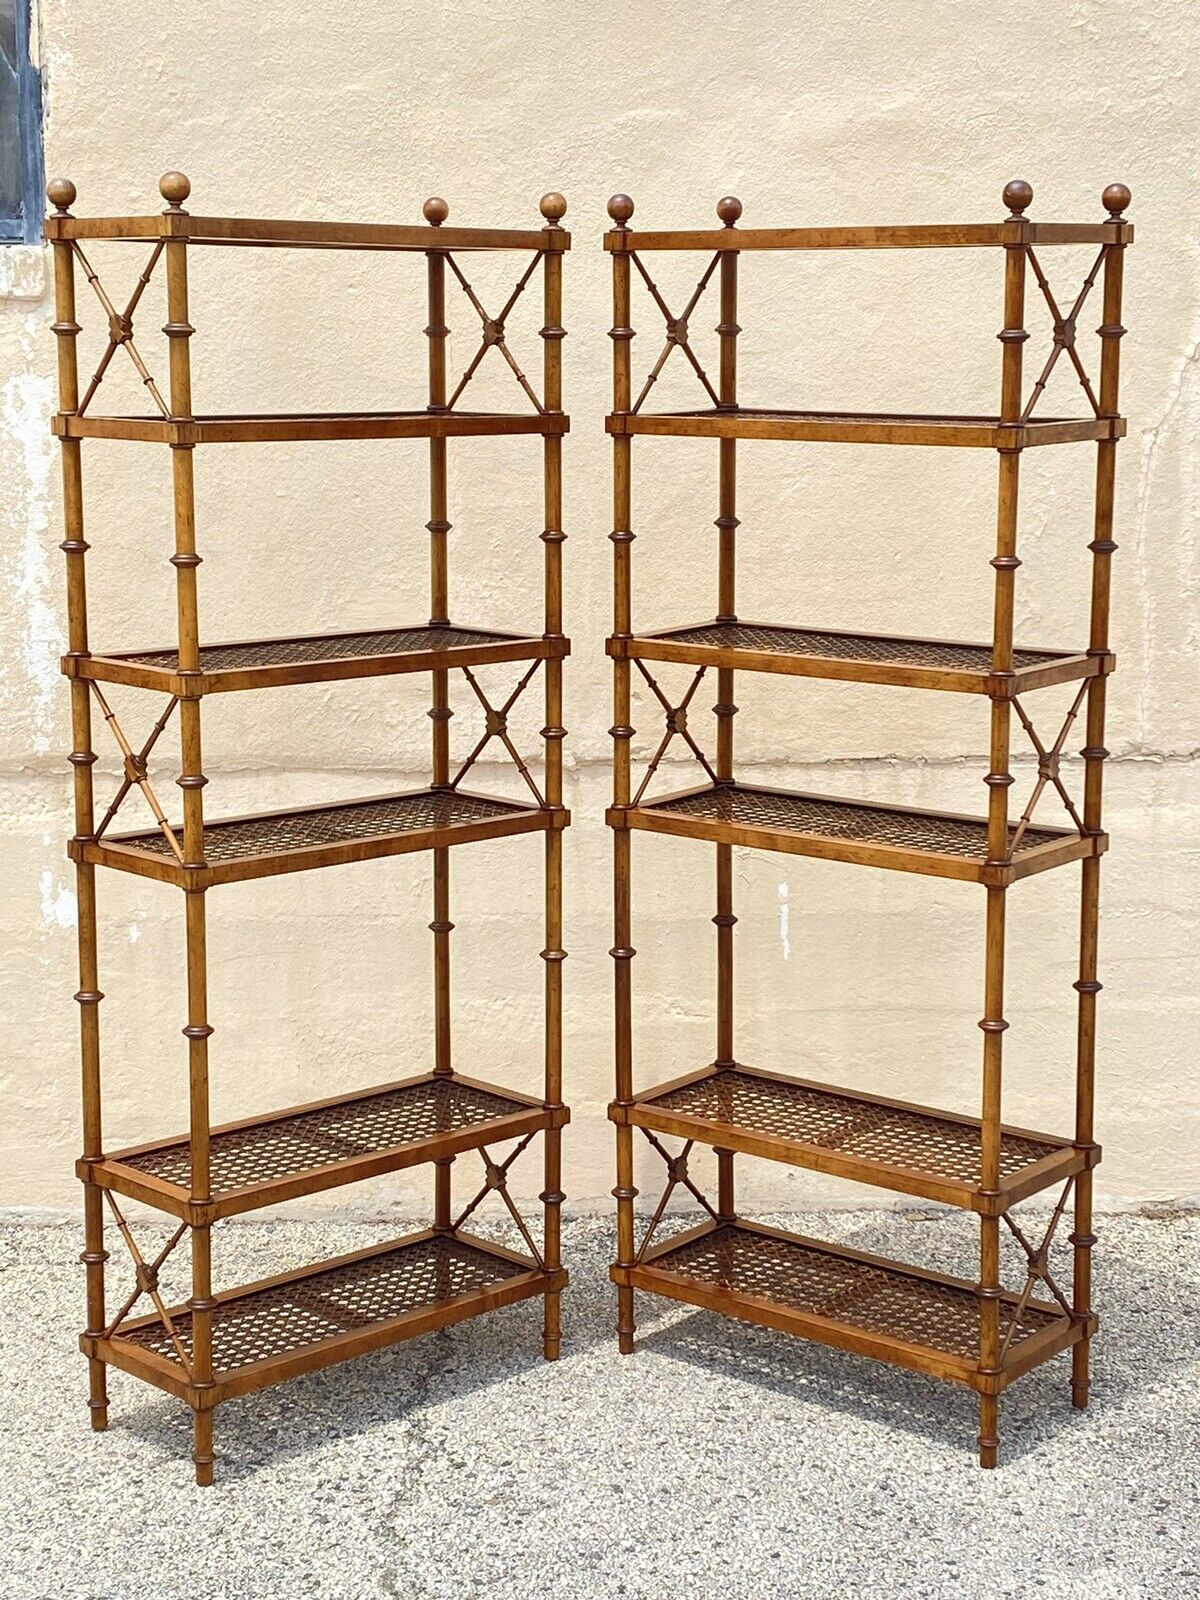 Vintage Hollywood Regency Faux Bamboo Wood & Cane 6 Tier Bookcase Etagere - Pair For Sale